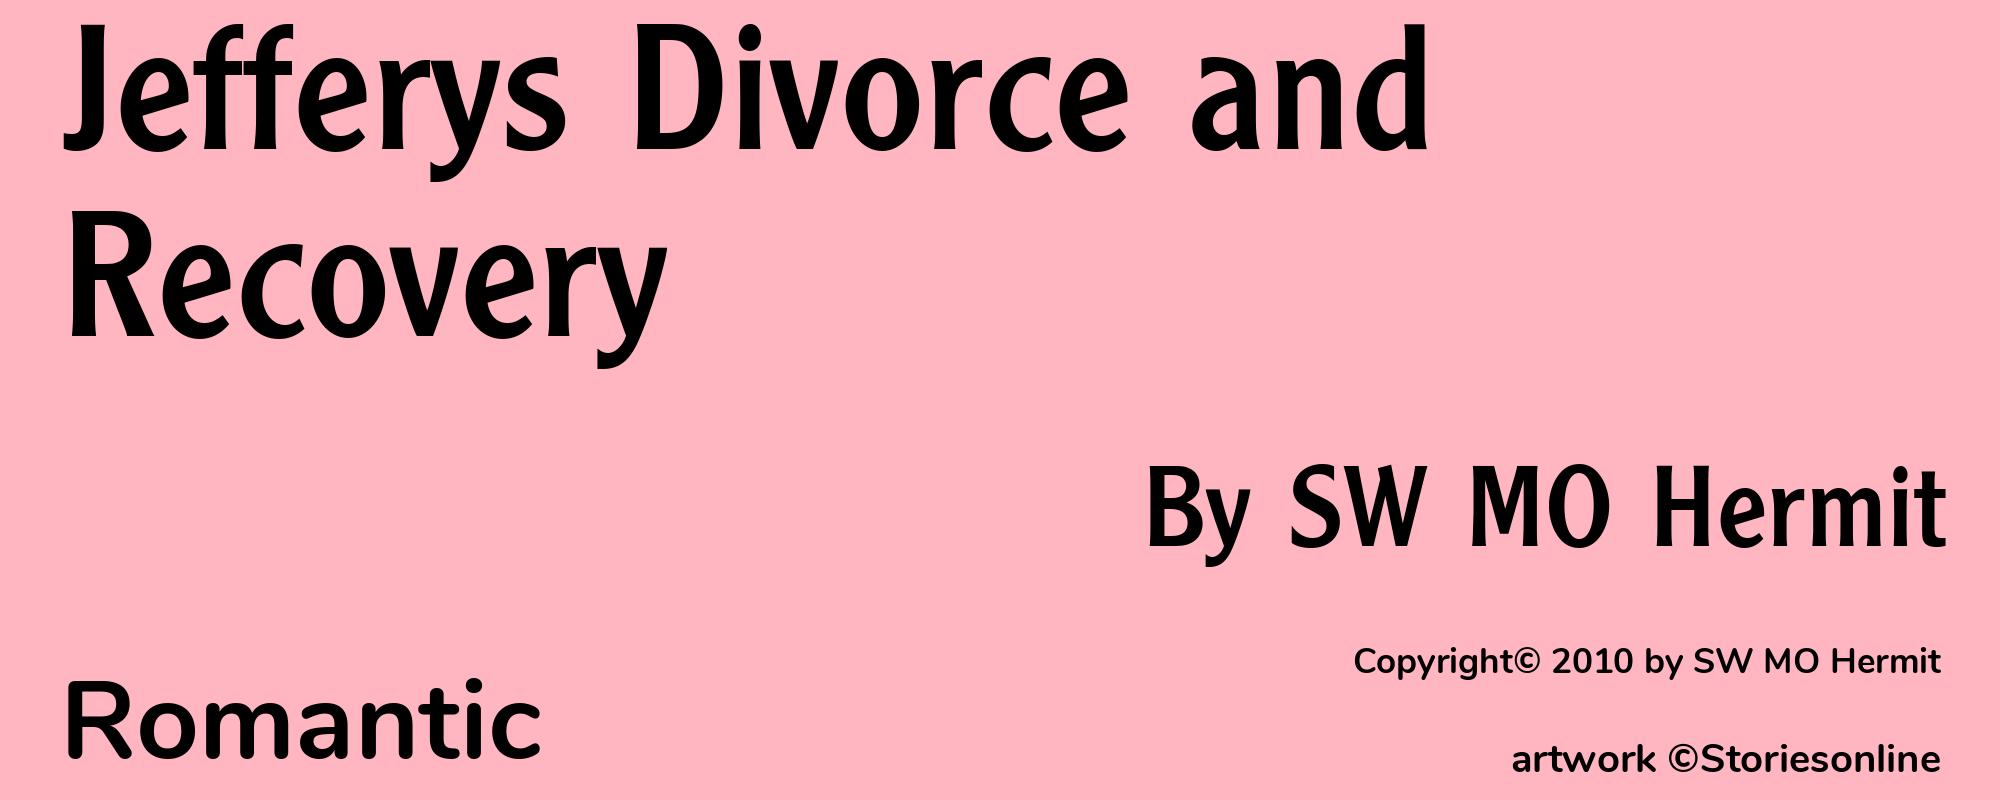 Jefferys Divorce and Recovery - Cover